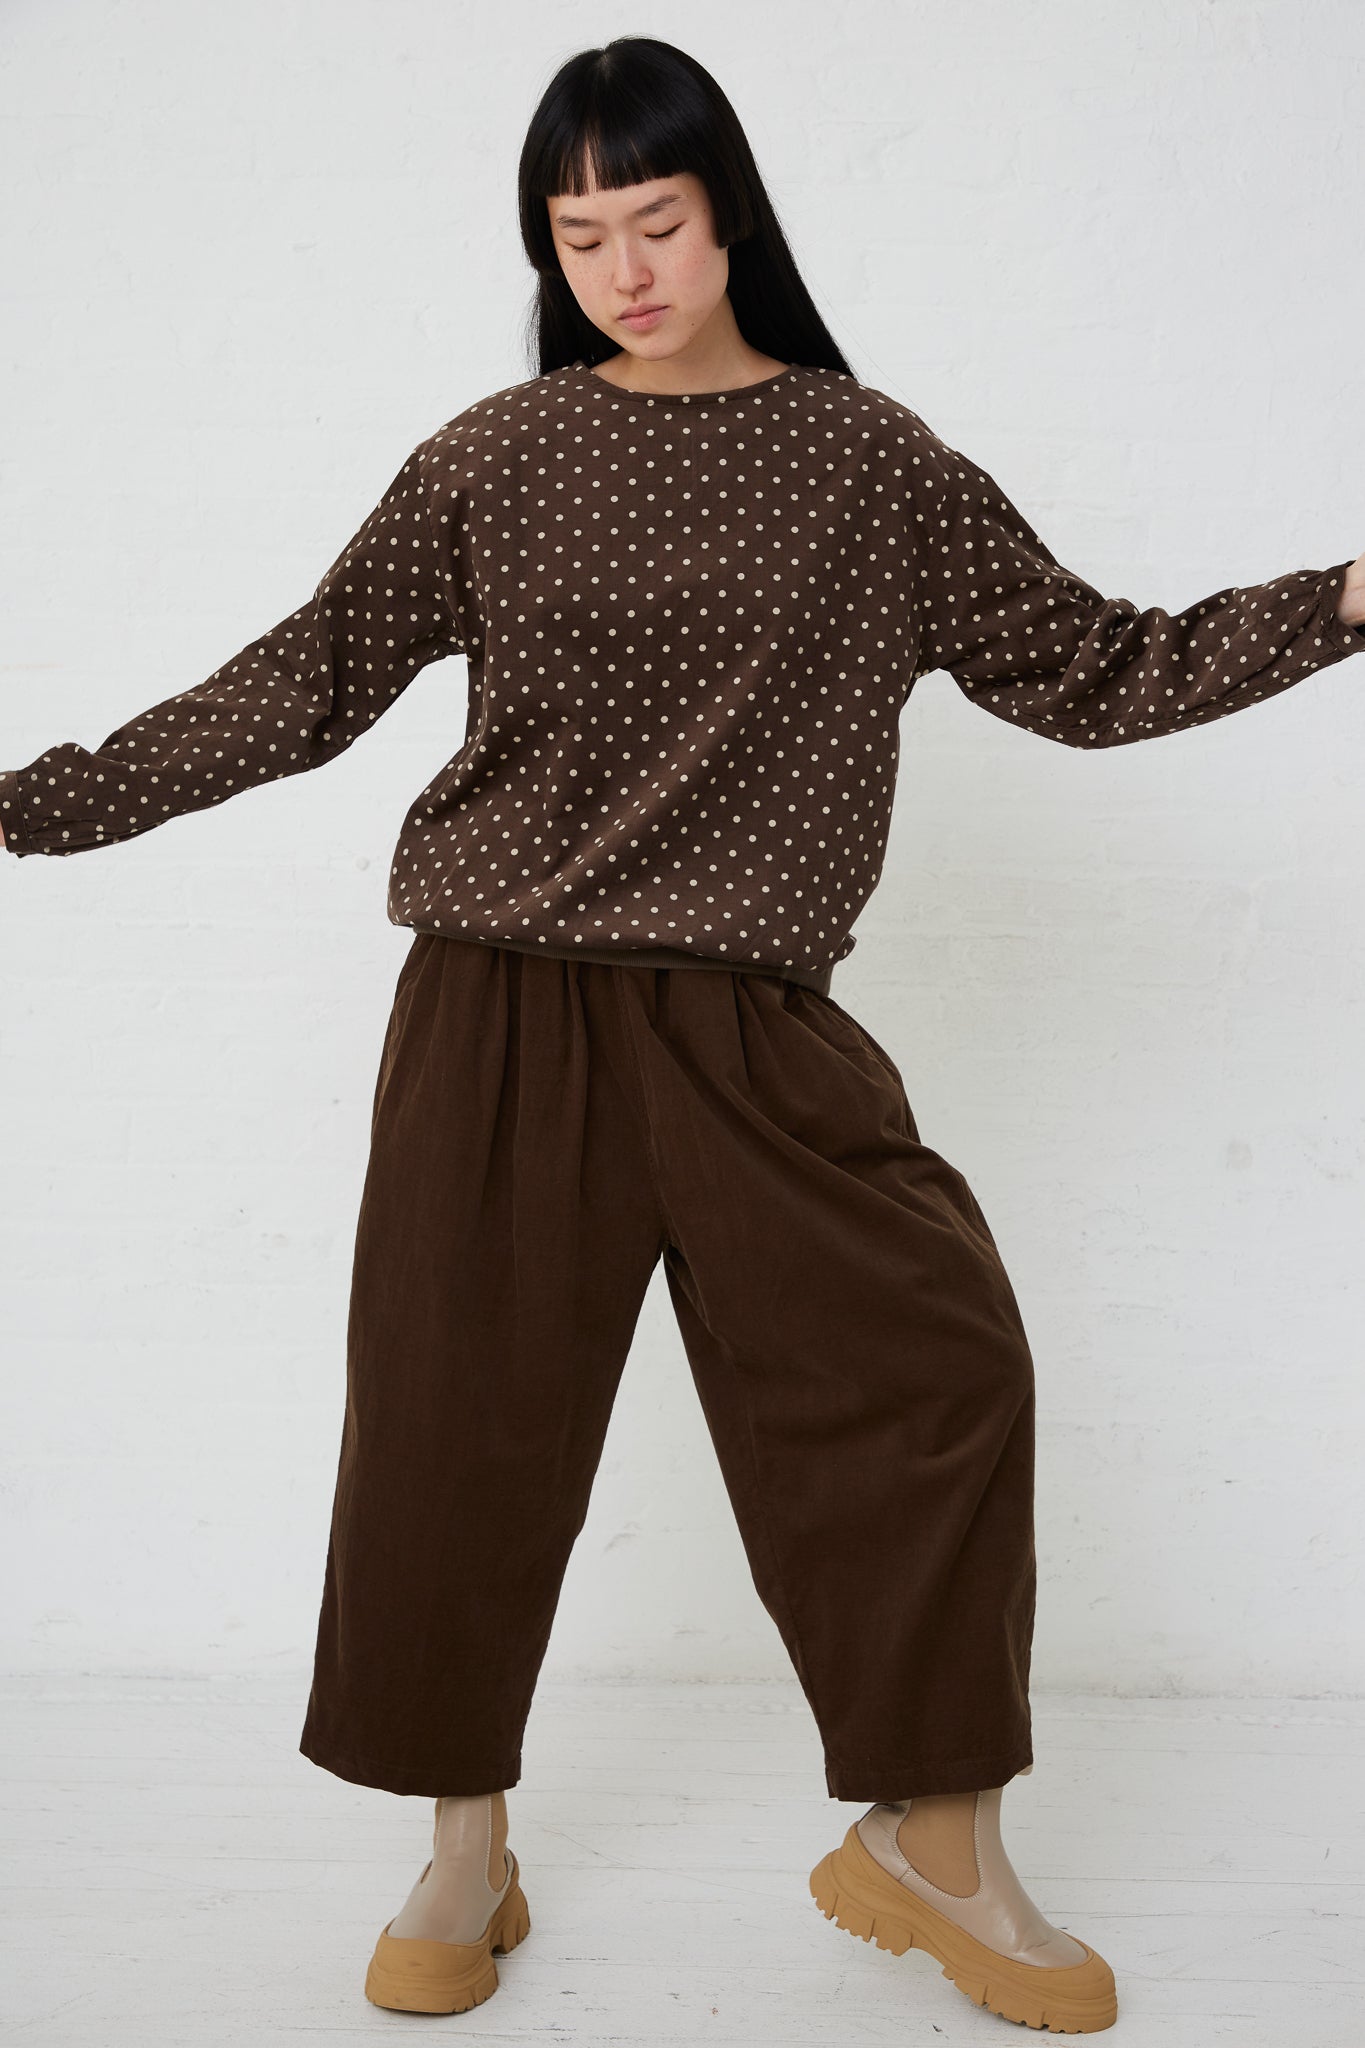 A woman wearing a relaxed fit brown polka dot sweater and Ichi Cotton Pant in Brown.